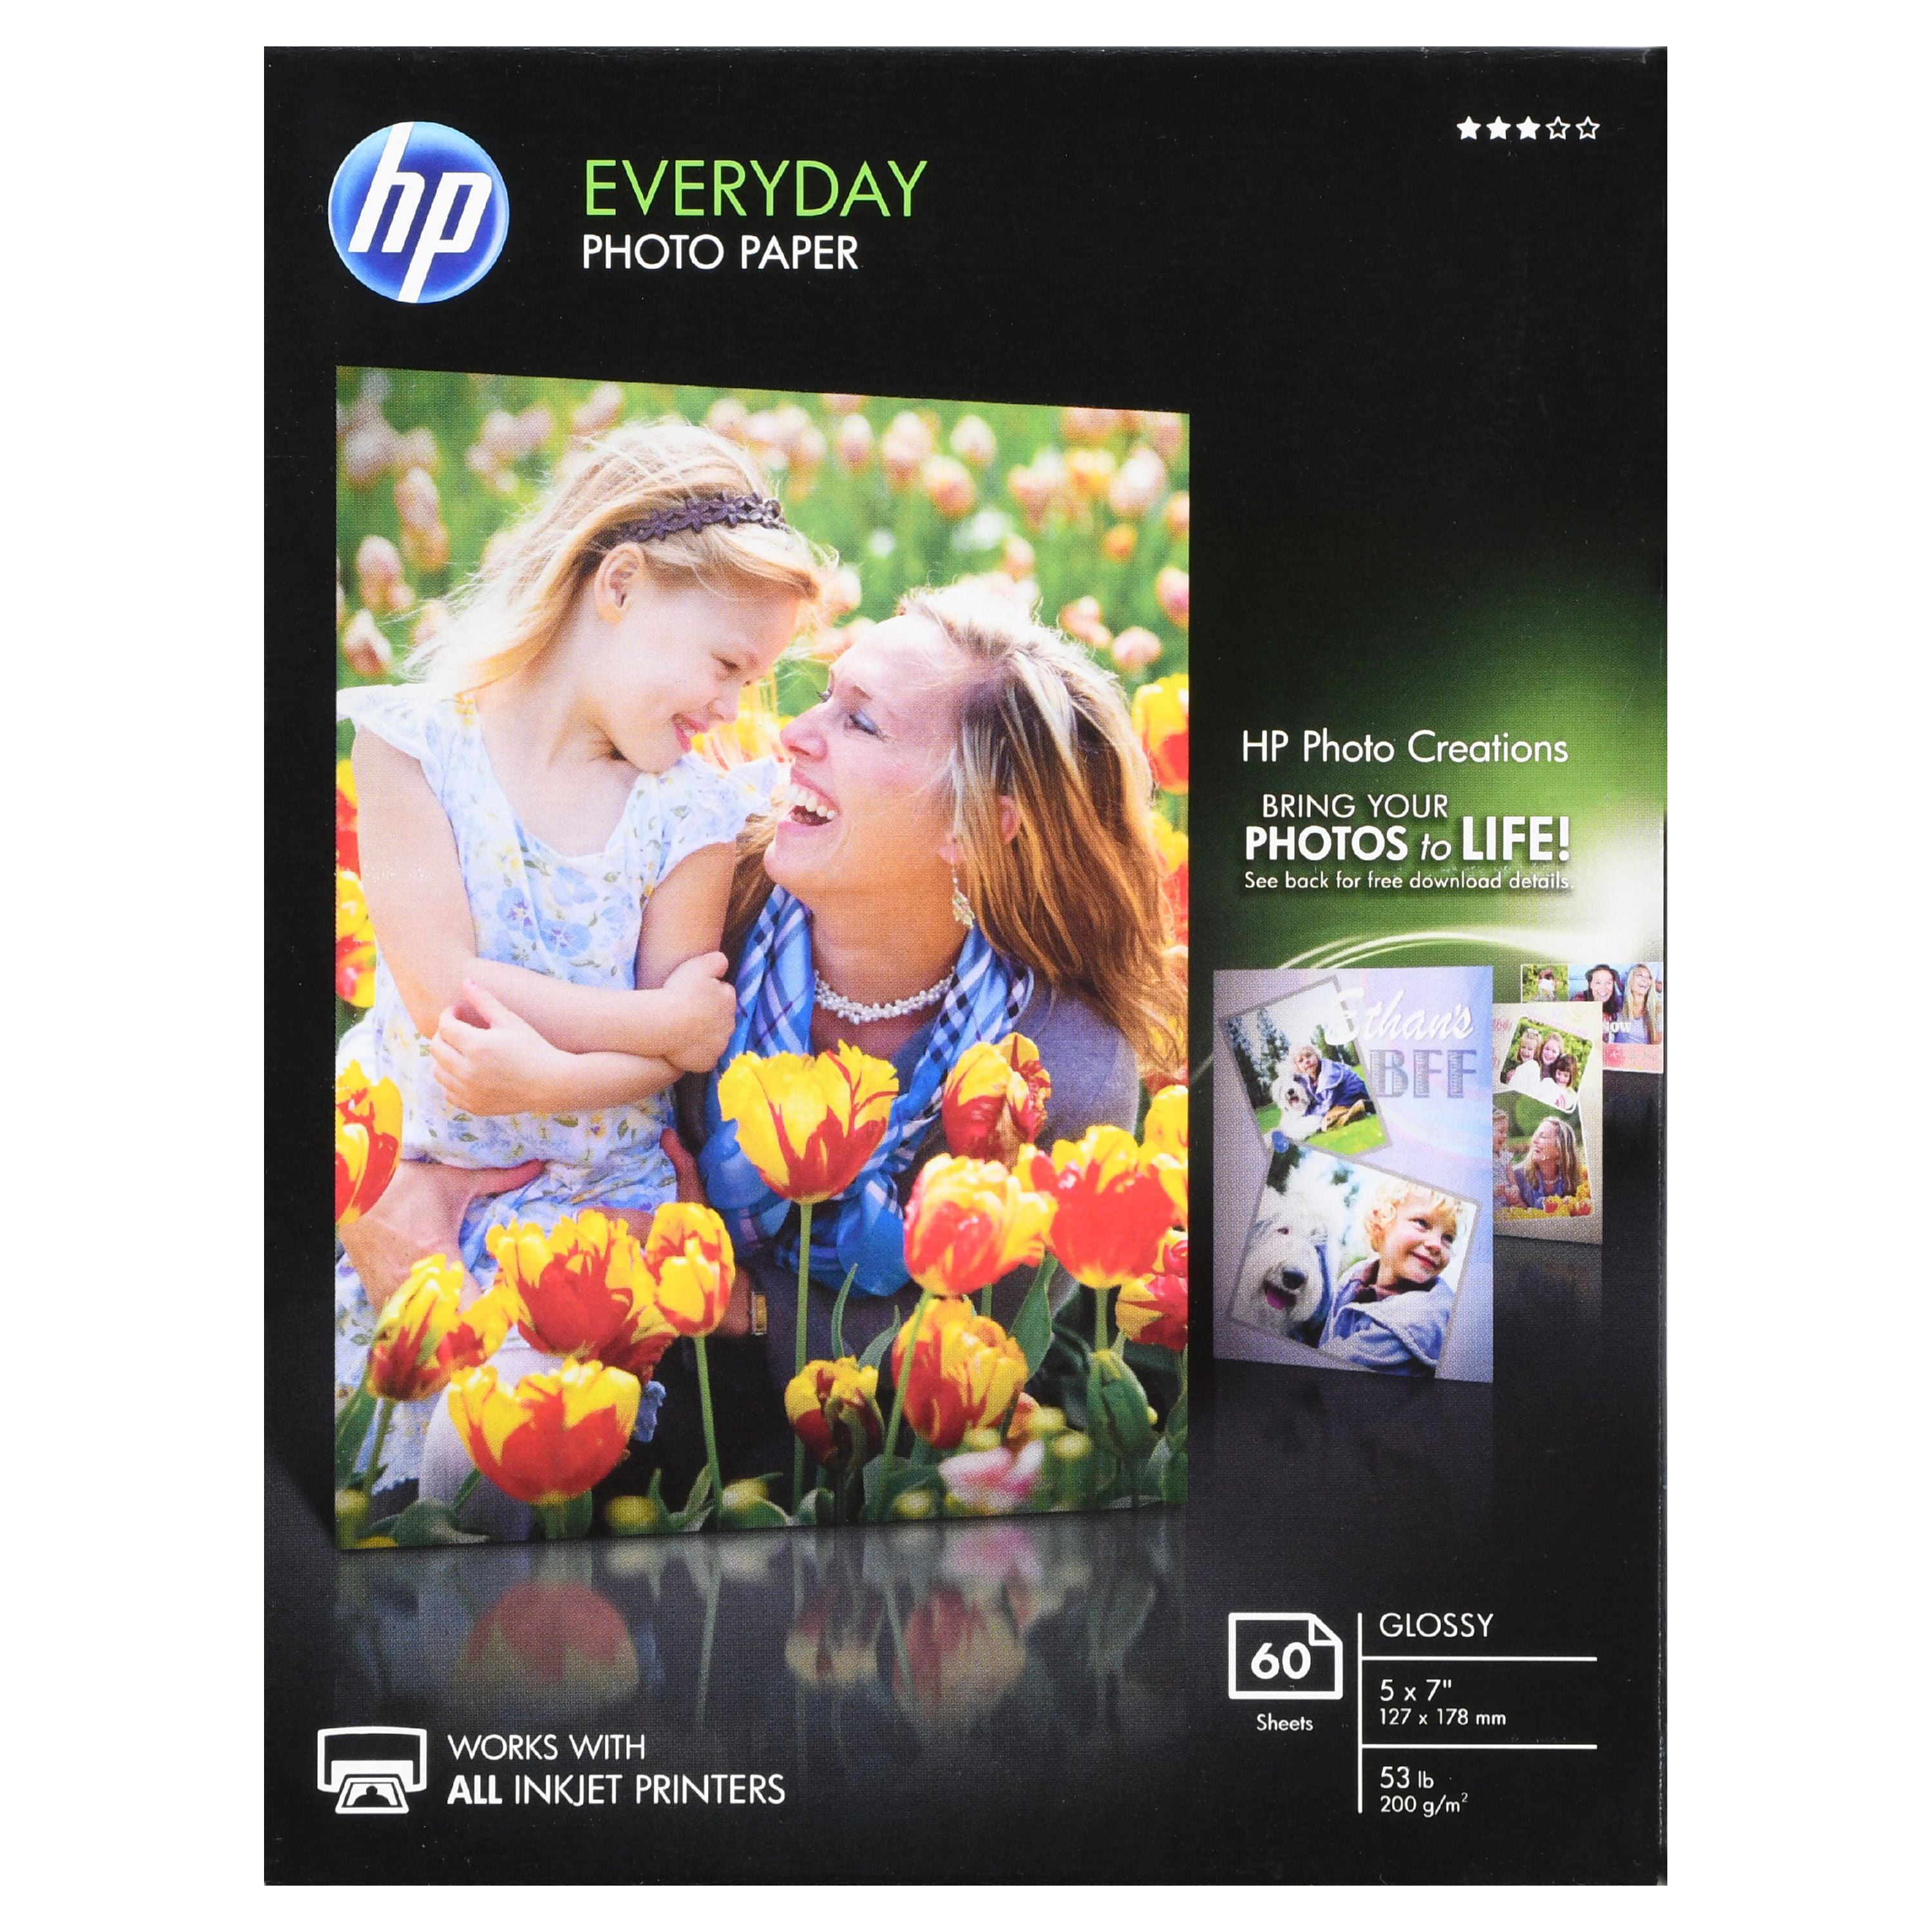 HP Inkjet Printer Gloossy 5" x 7" & 4" x 6" Photo Card Picture Paper SF791A 